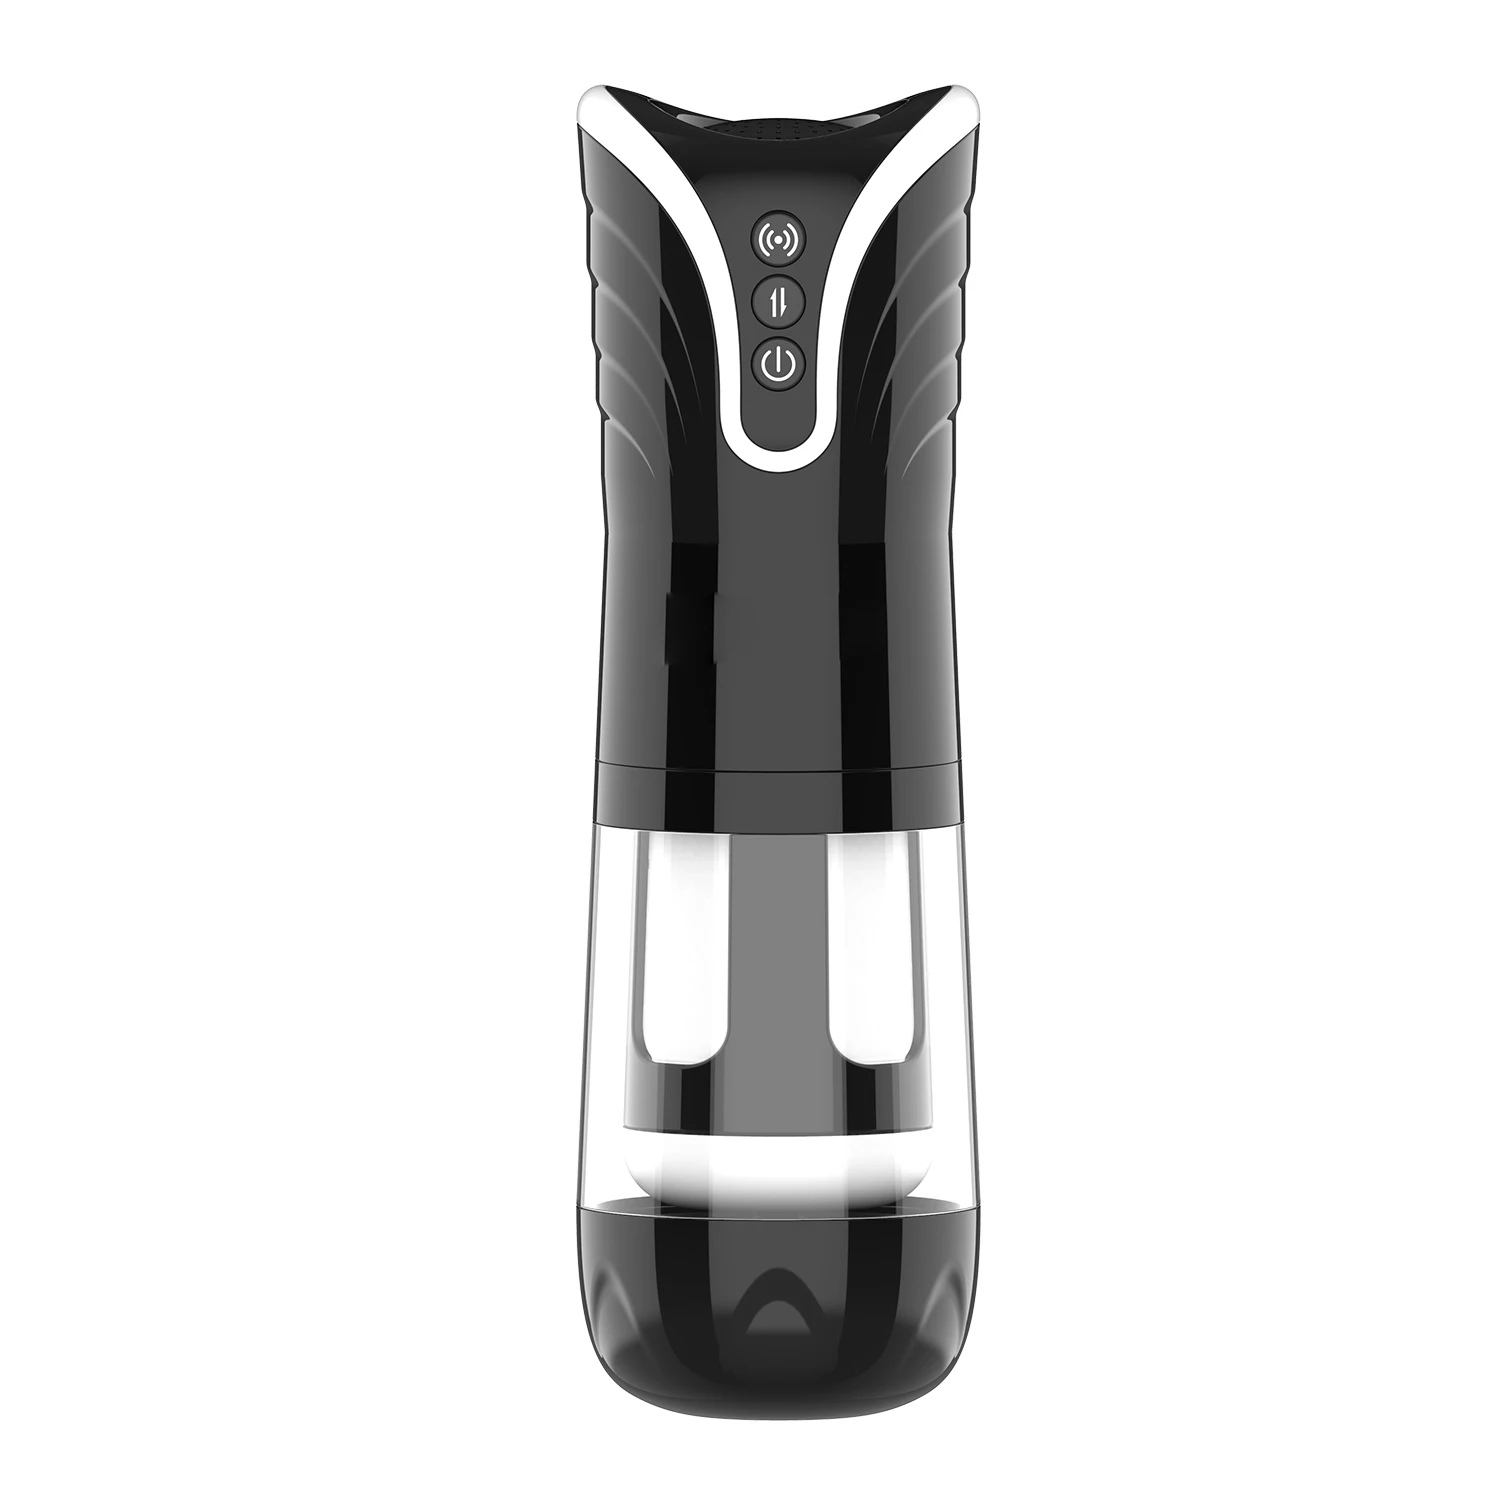 Wholesale Male Masturbation Aircraft Cup Homemade Sex Toys For Men Masturbation Penis With Video From m.alibaba image photo